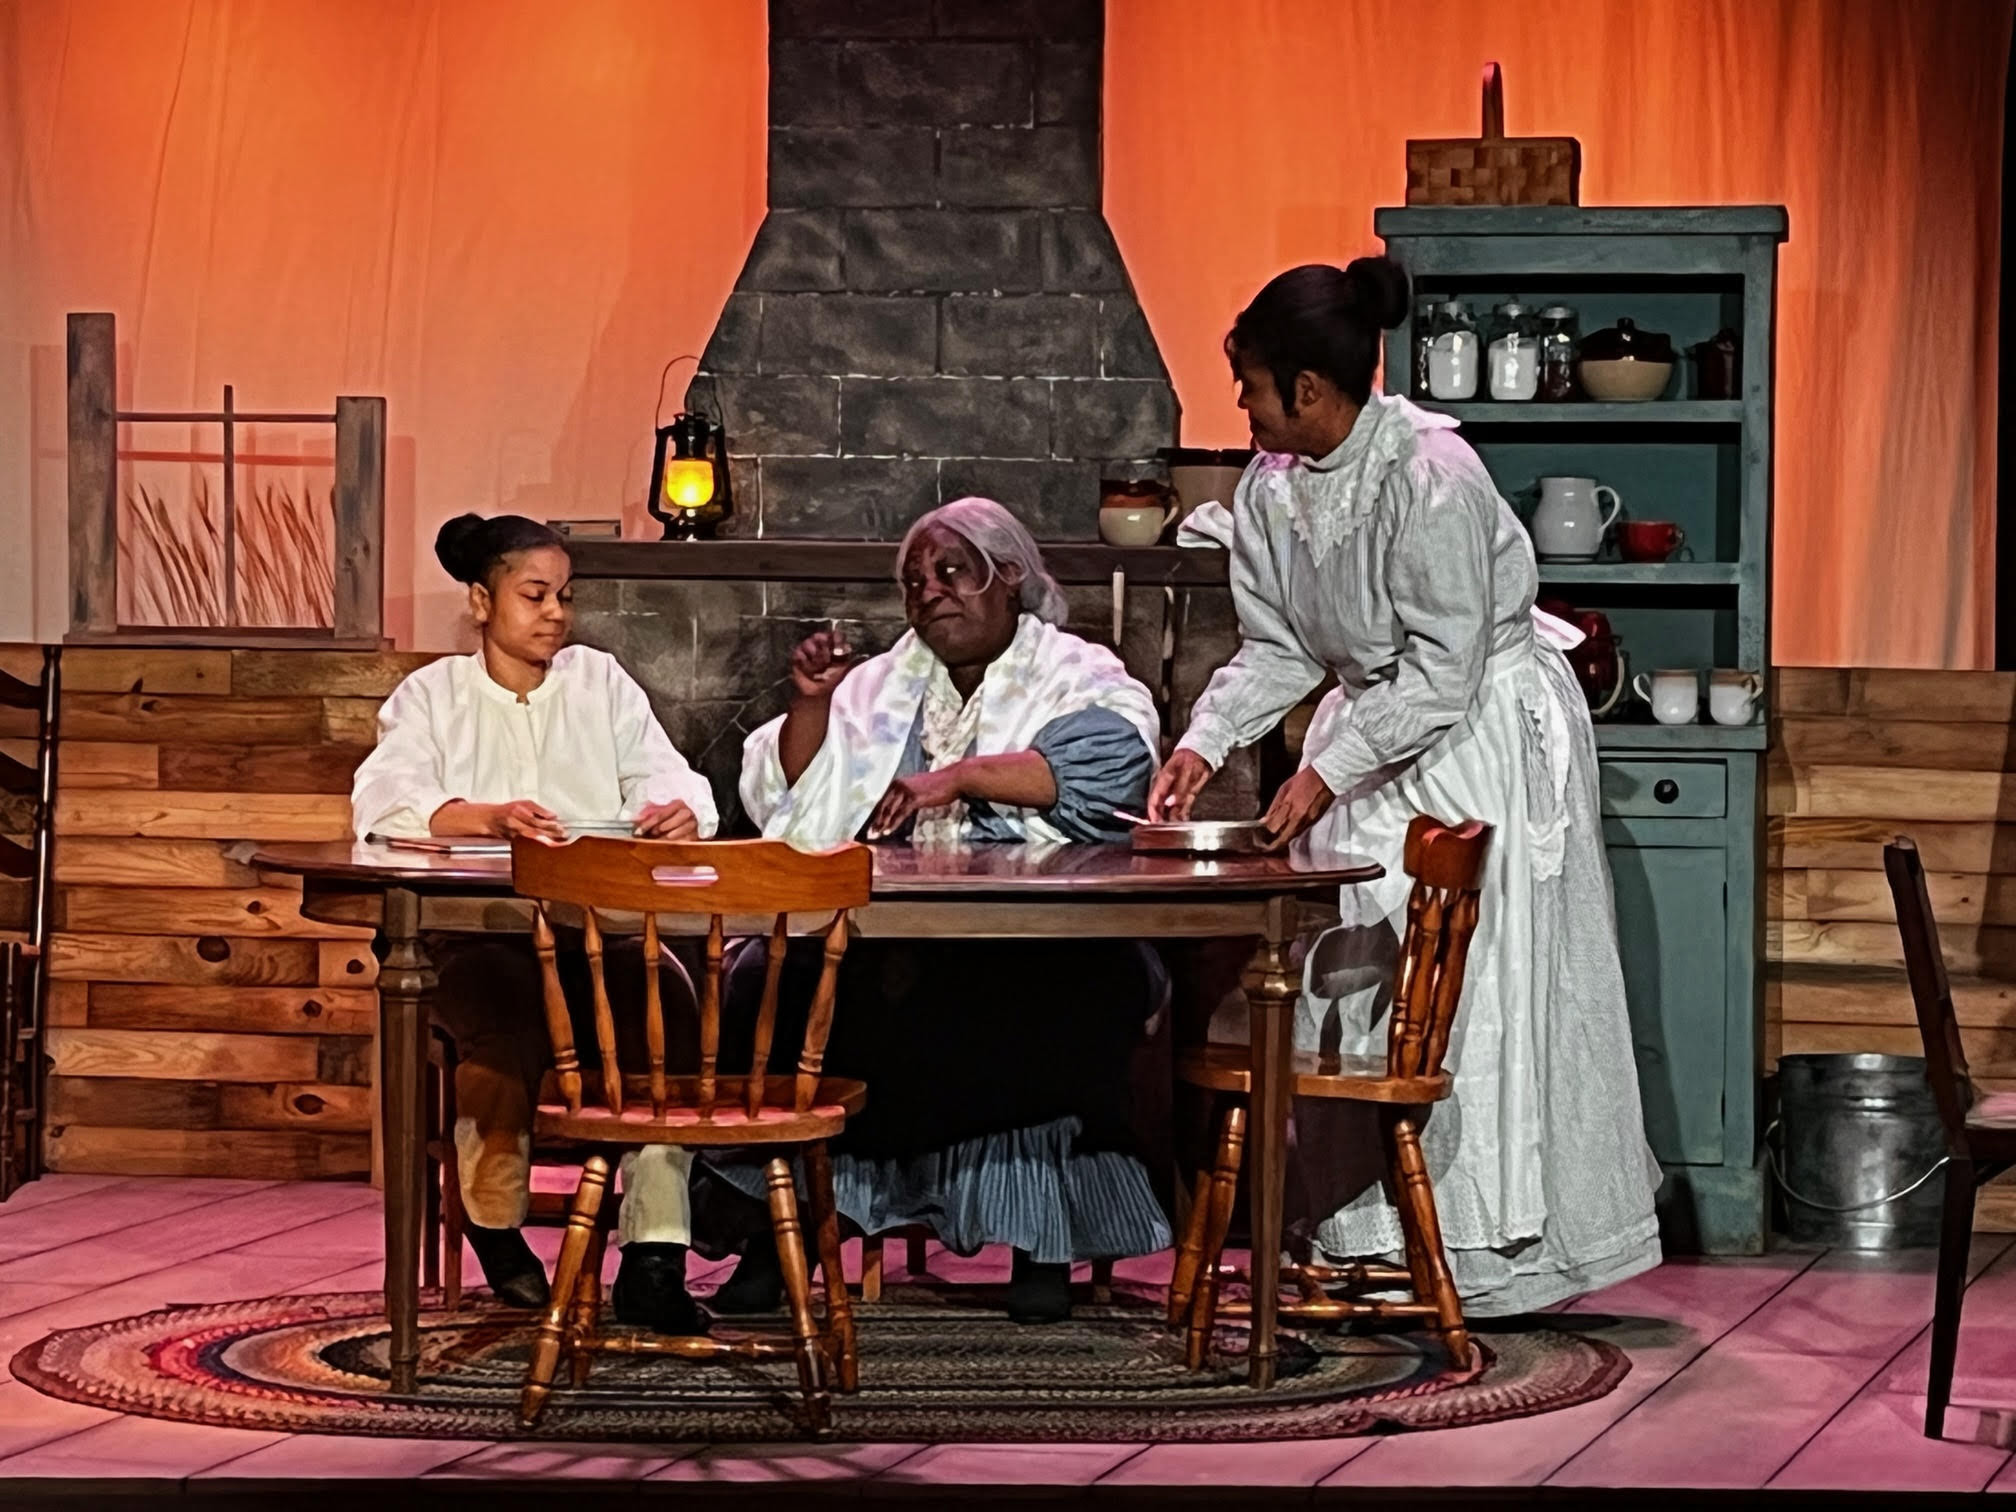 Bryana Bentley, Burgess Byrd* and Shantel Routt in "Flyin' West" at Falcon Theatre.